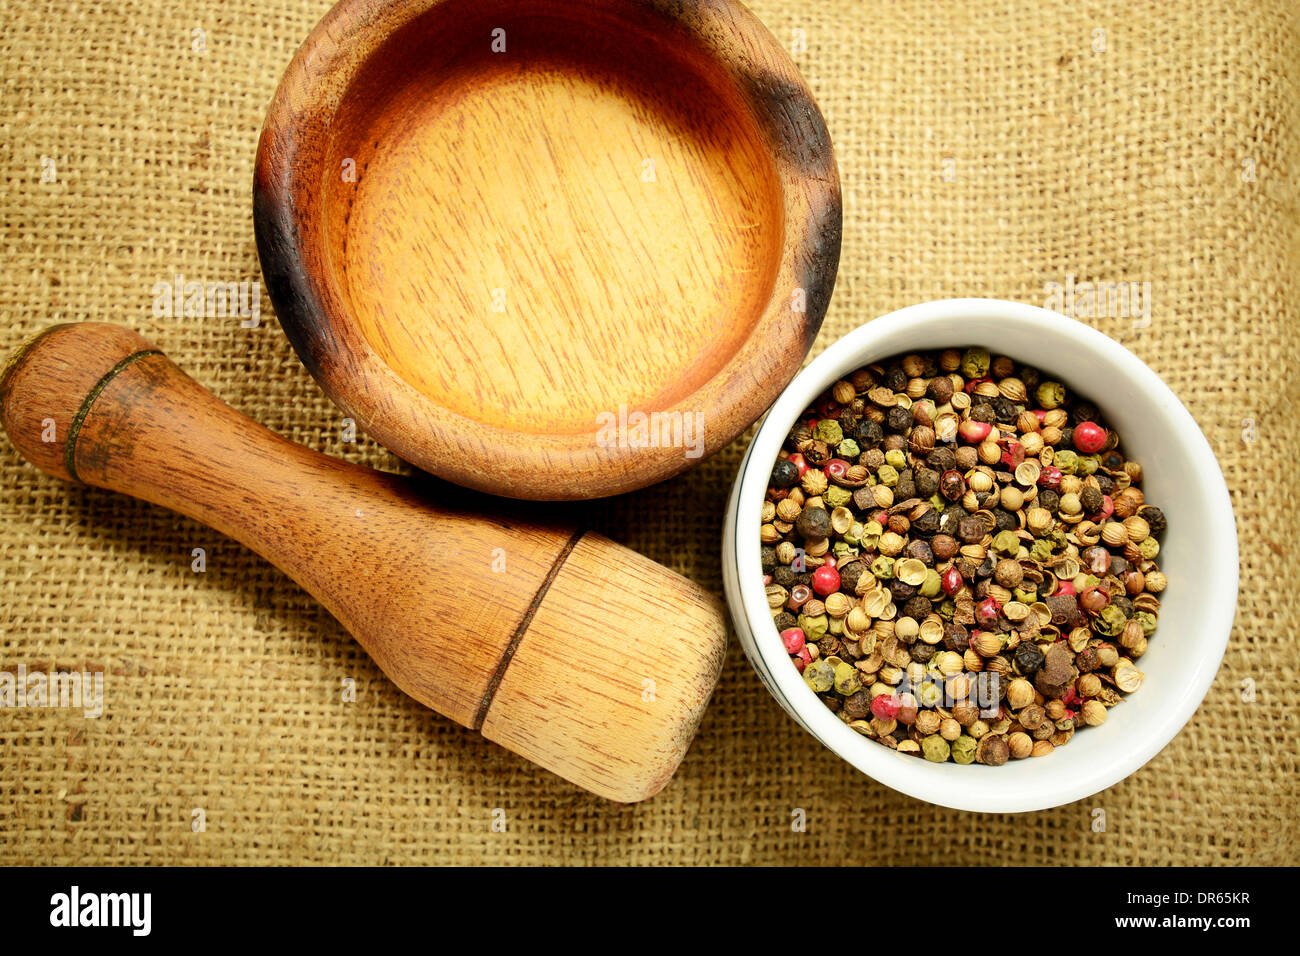 Macro shot of peppercorns and a wooden grinder and grinding bowl Stock Photo